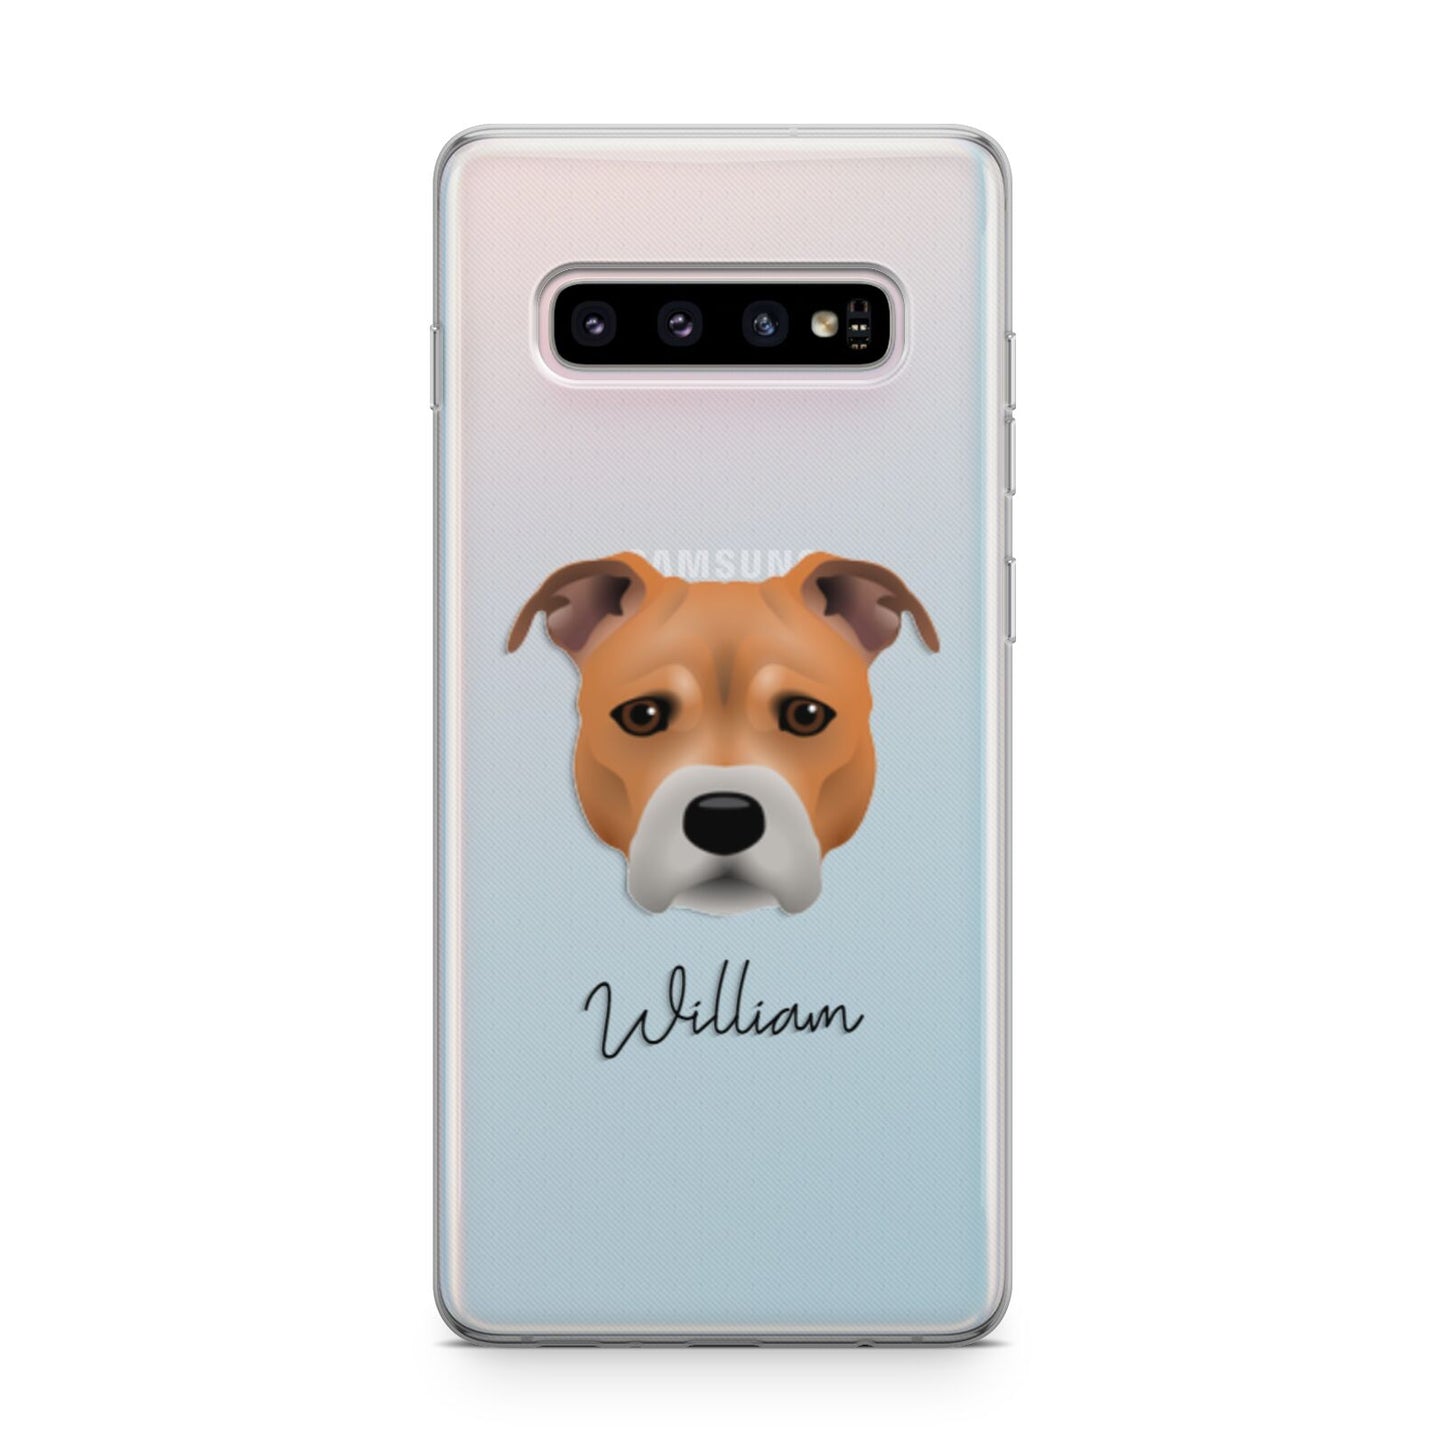 Staffordshire Bull Terrier Personalised Samsung Galaxy S10 Plus Case